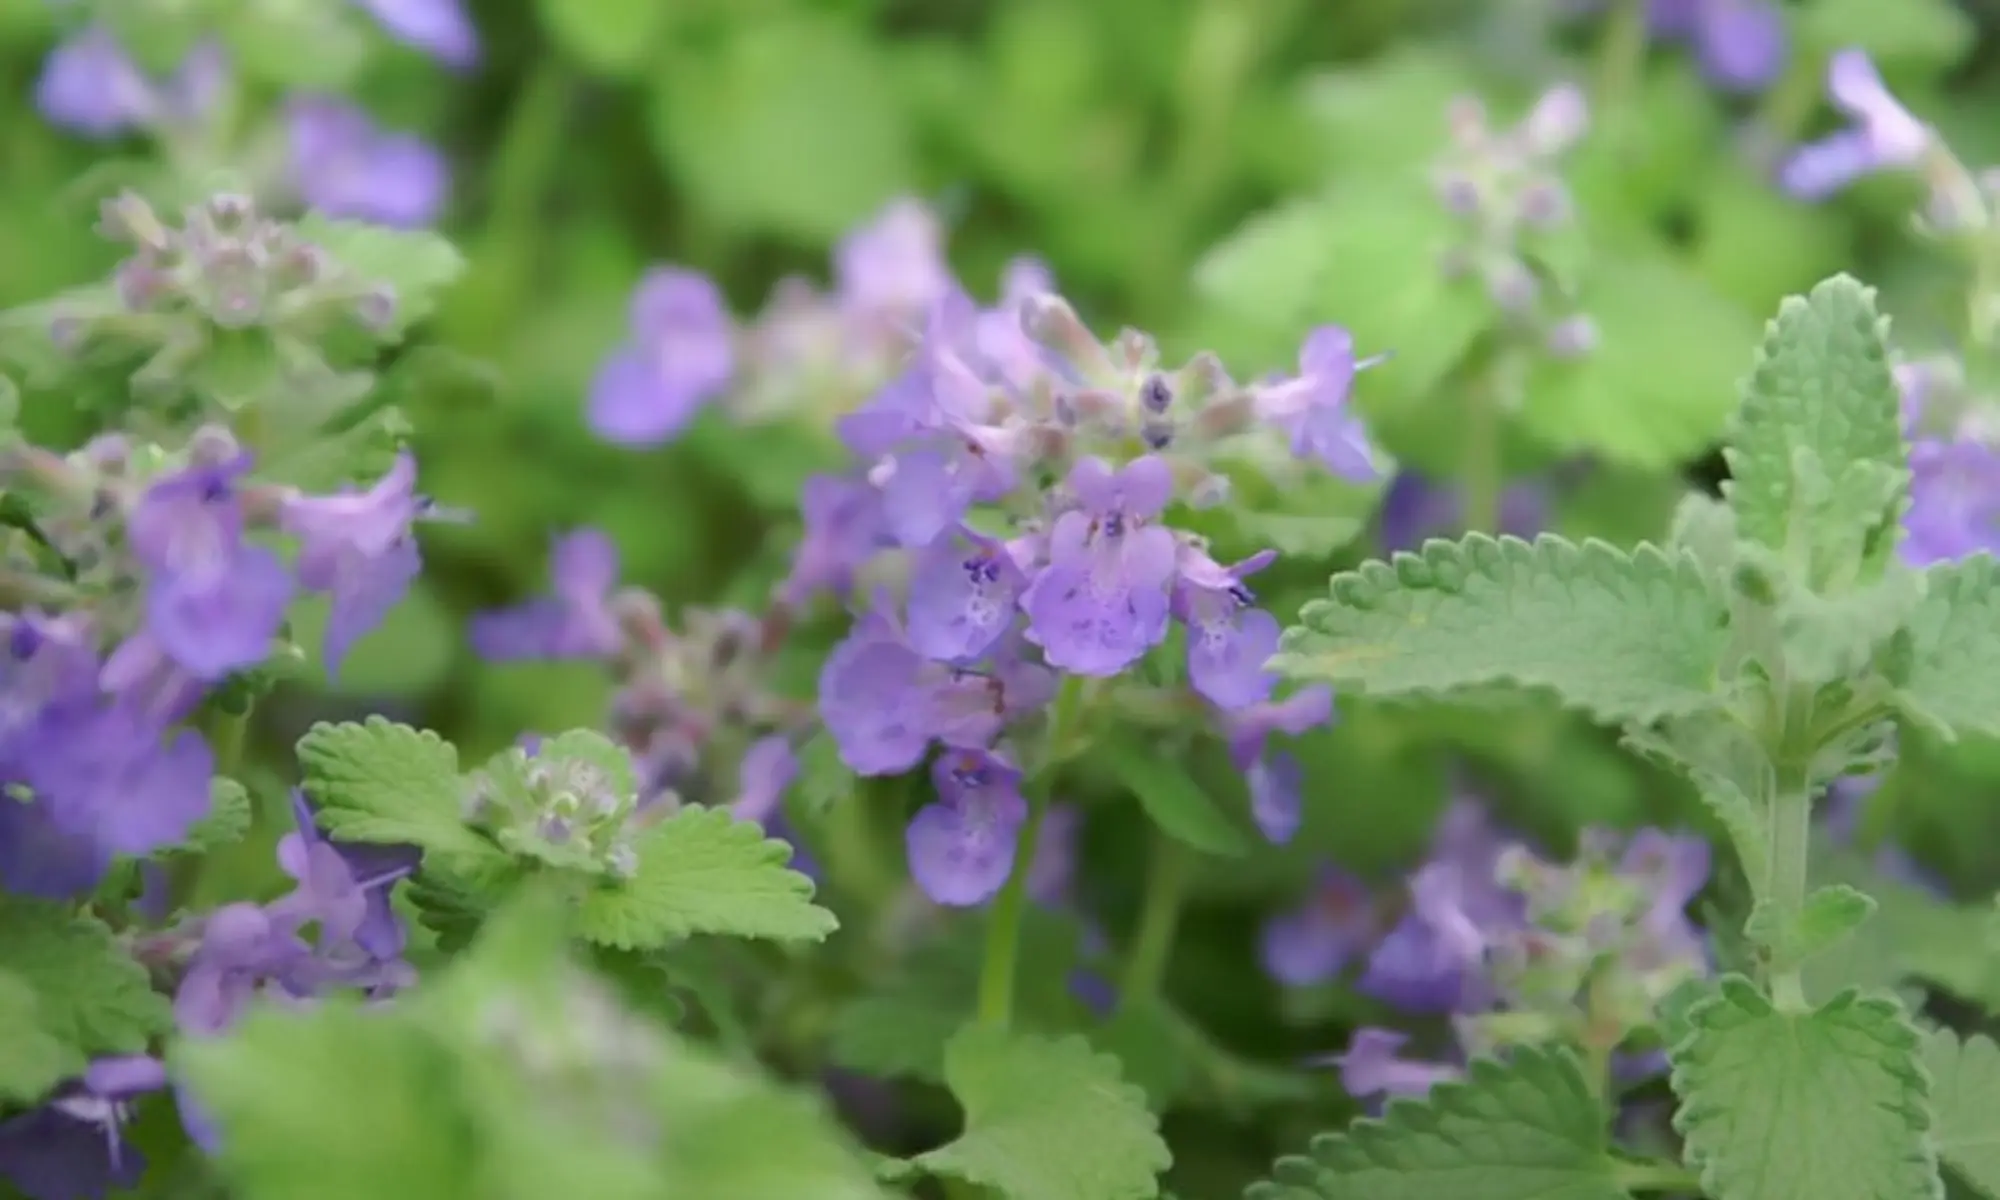 Close-up on catmint with purple flowers in bloom.